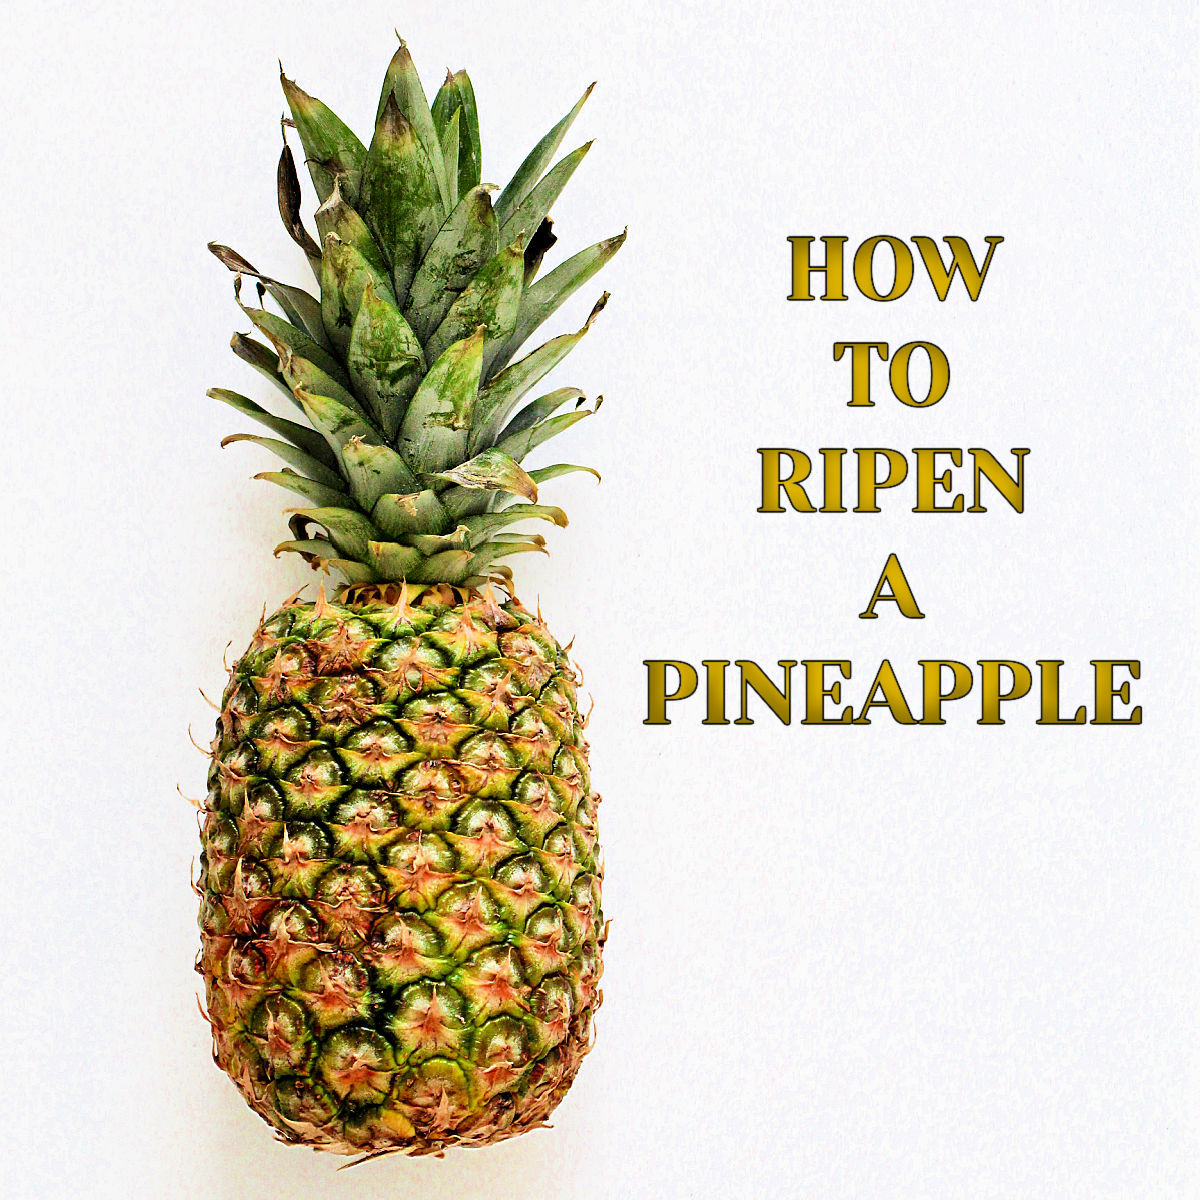 Picture of a pineapple and the words How to Ripen a Pineapple.